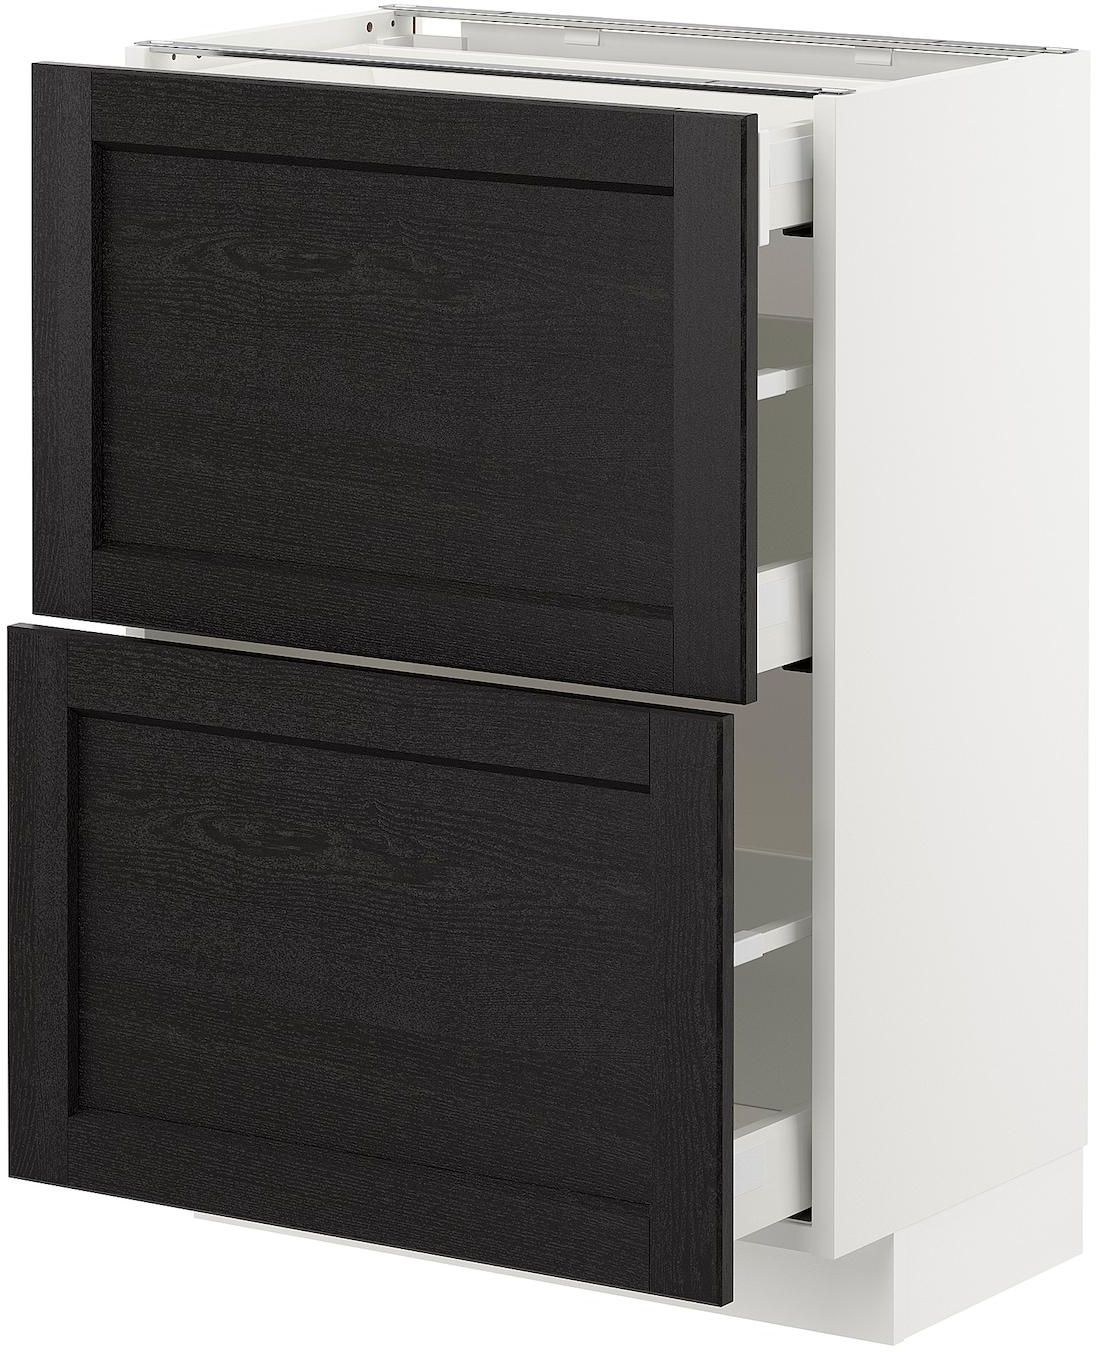 METOD / MAXIMERA Base cab with 2 fronts/3 drawers - white/Lerhyttan black stained 60x37 cm